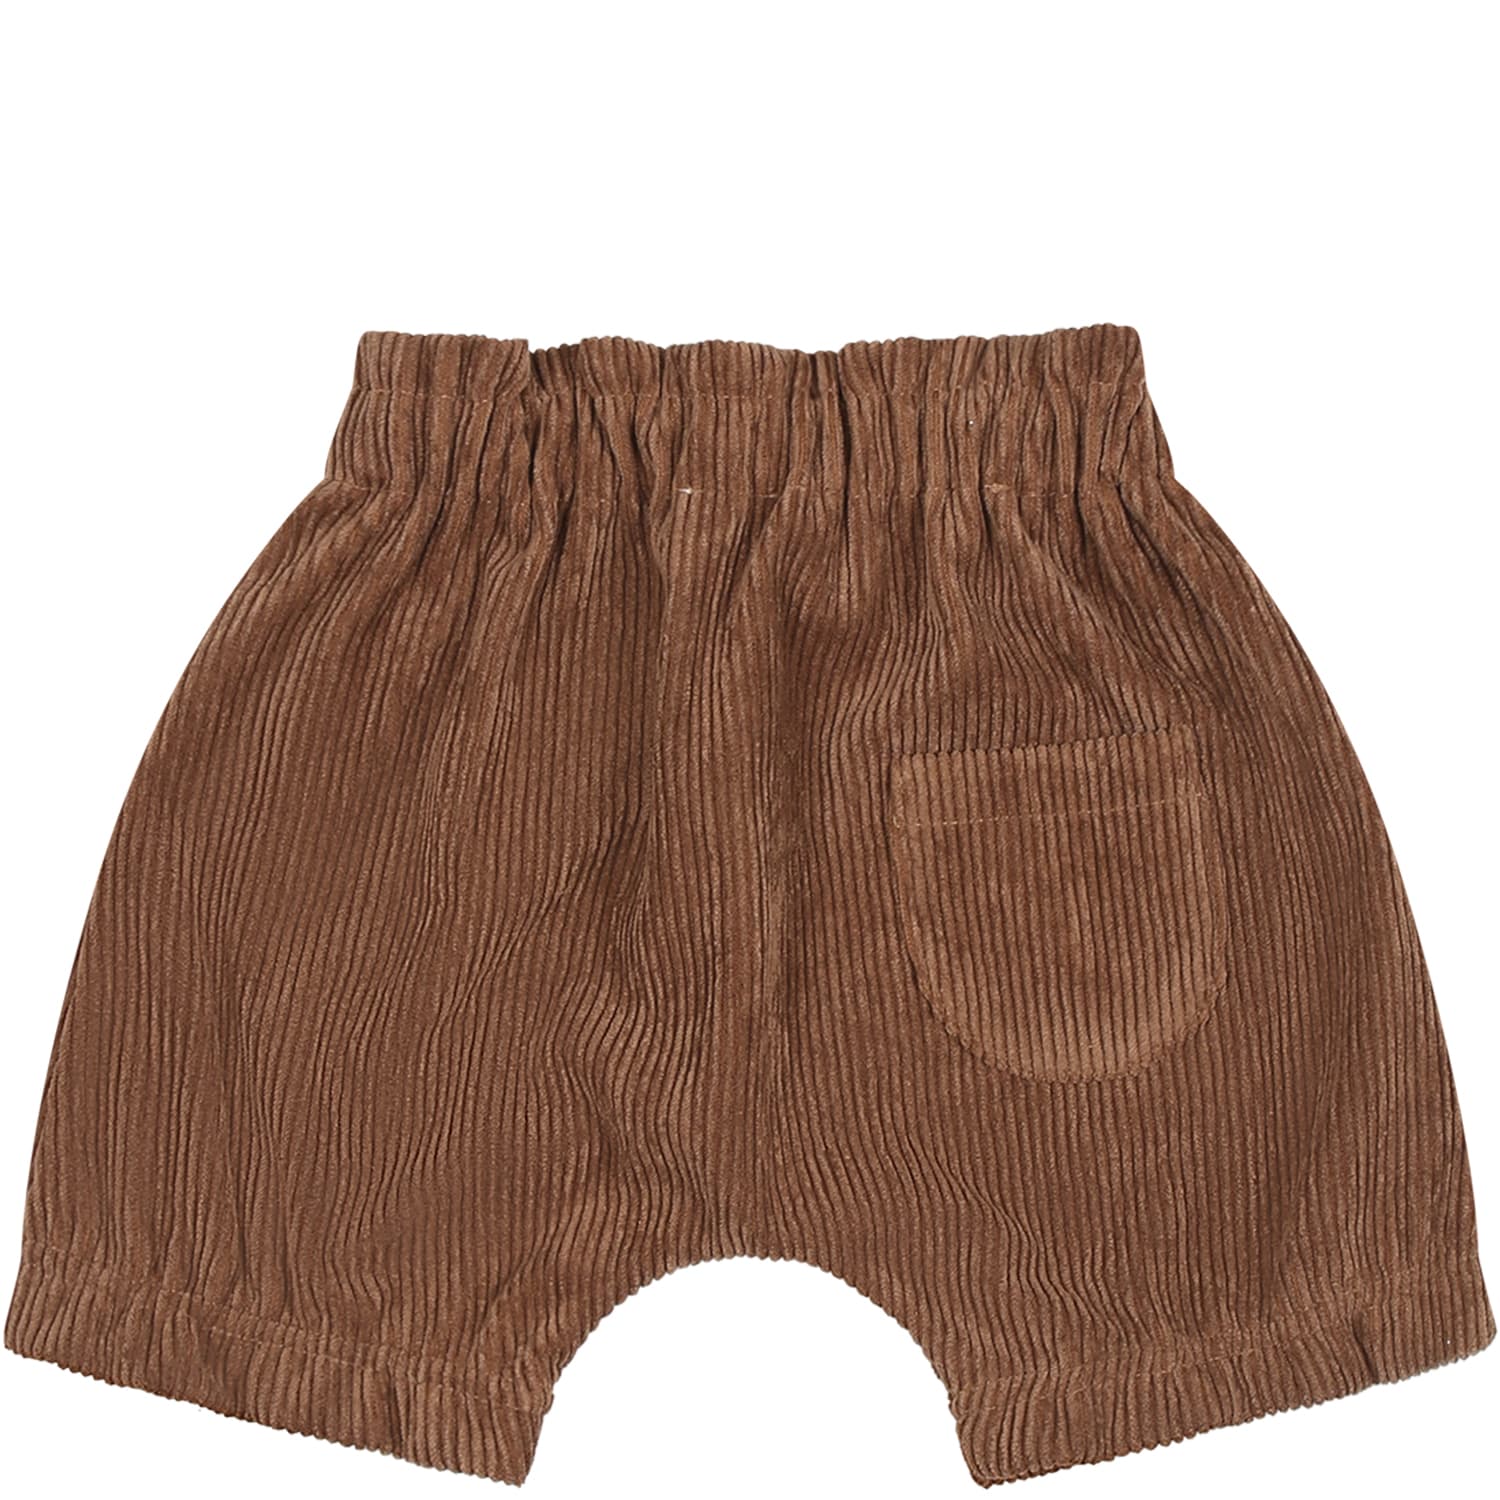 Shop Caffe' D'orzo Brown Shorts For Baby Girl